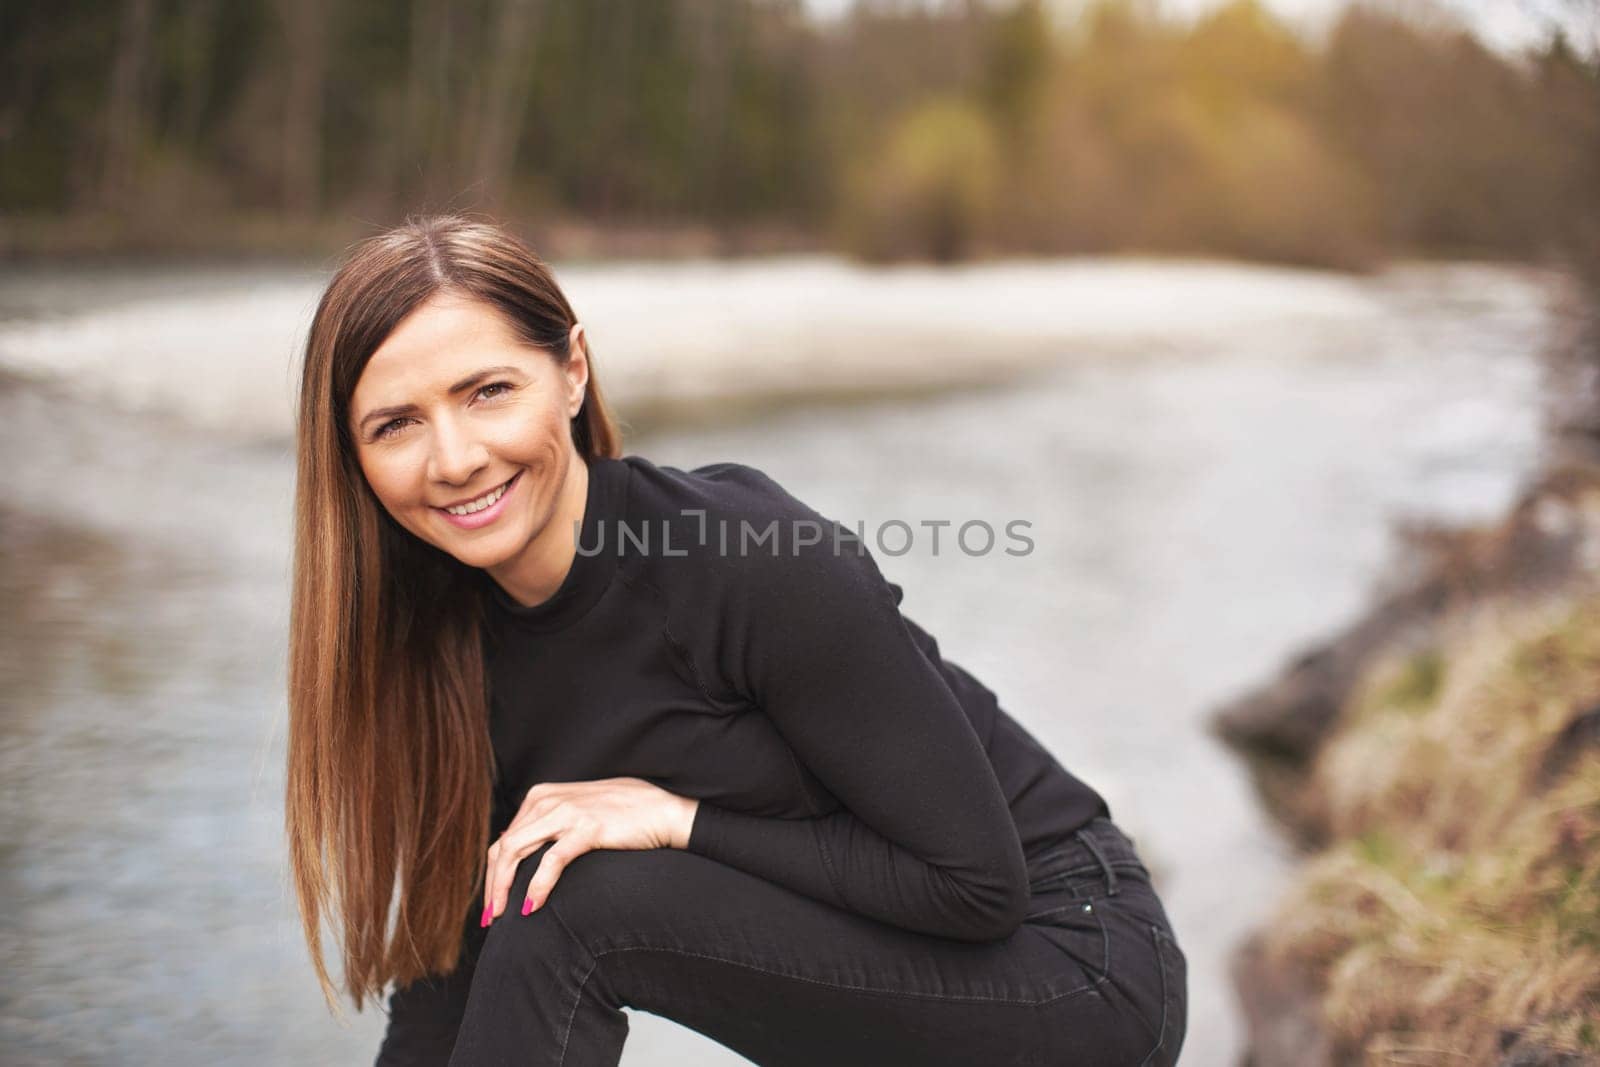 Portrait of young woman wearing black jeans and top, leaning, her long hair falling down, smiling. Blurred river in background